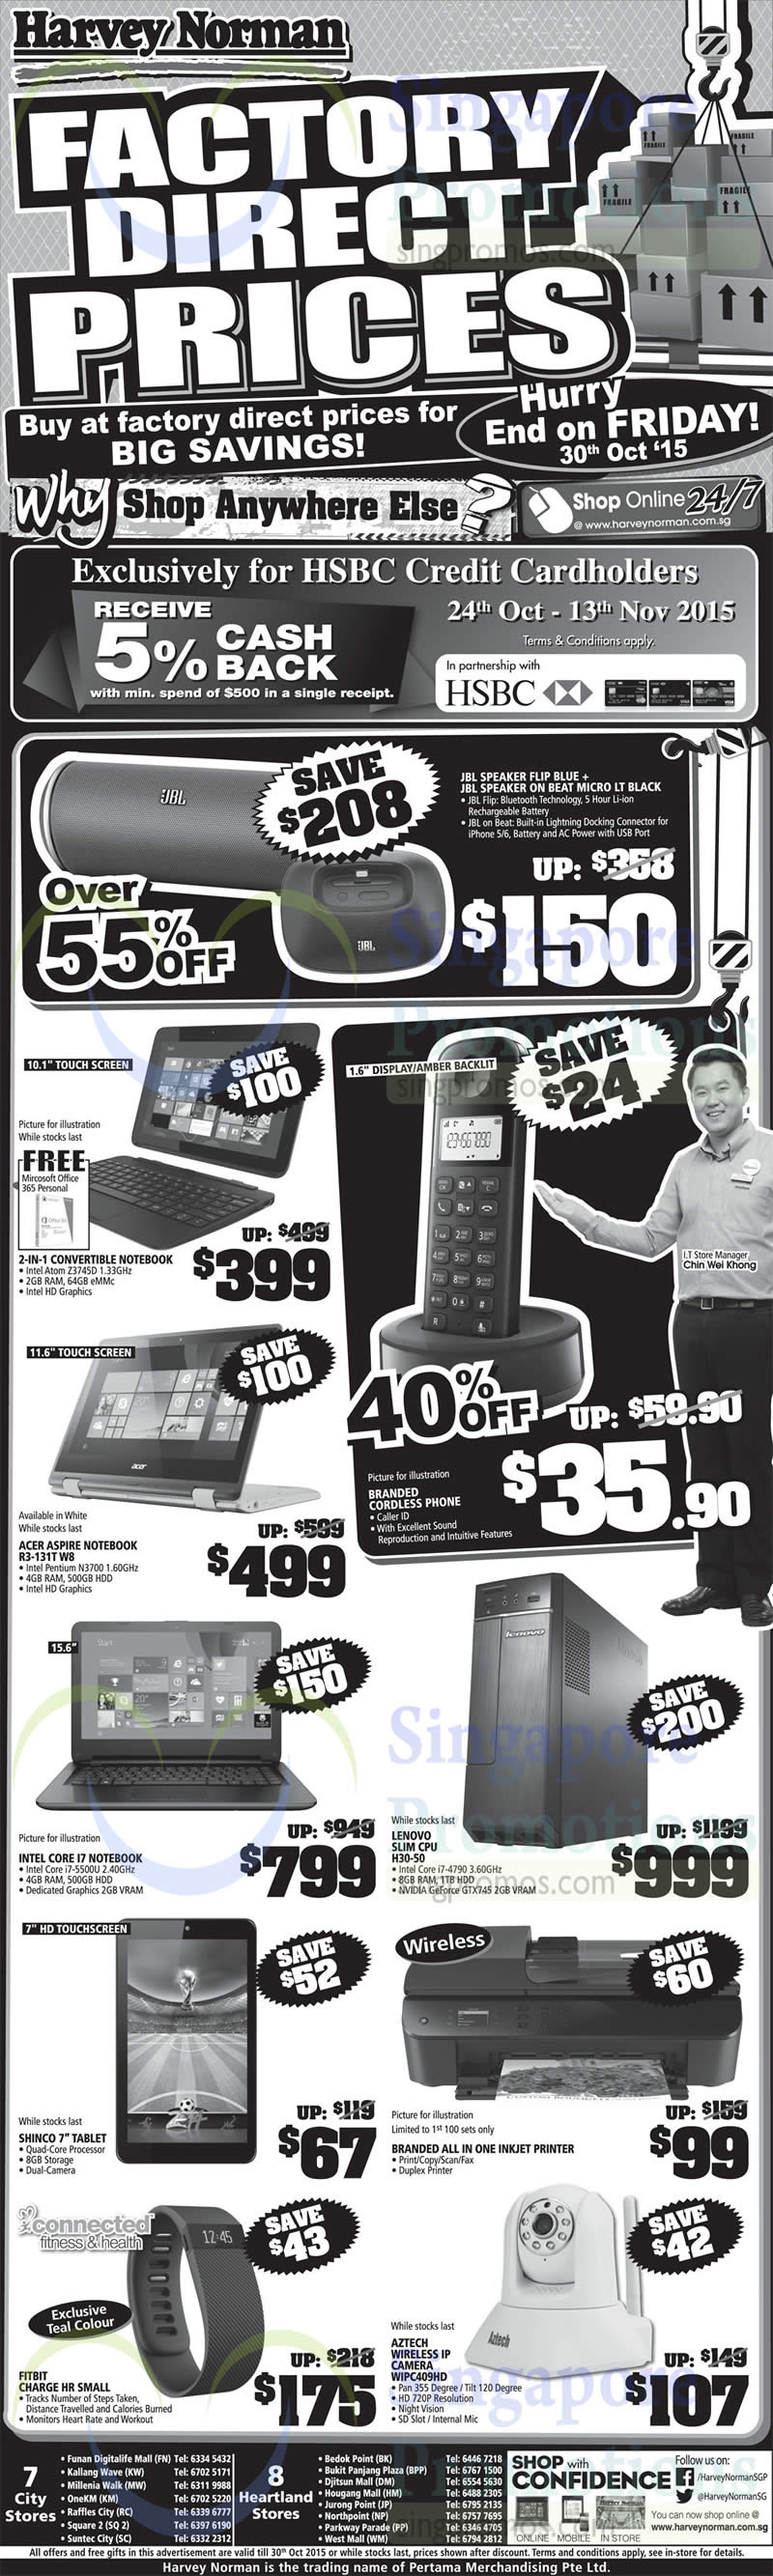 Featured image for Harvey Norman Electronics, Appliances, IT & Other Offers 24 - 30 Oct 2015